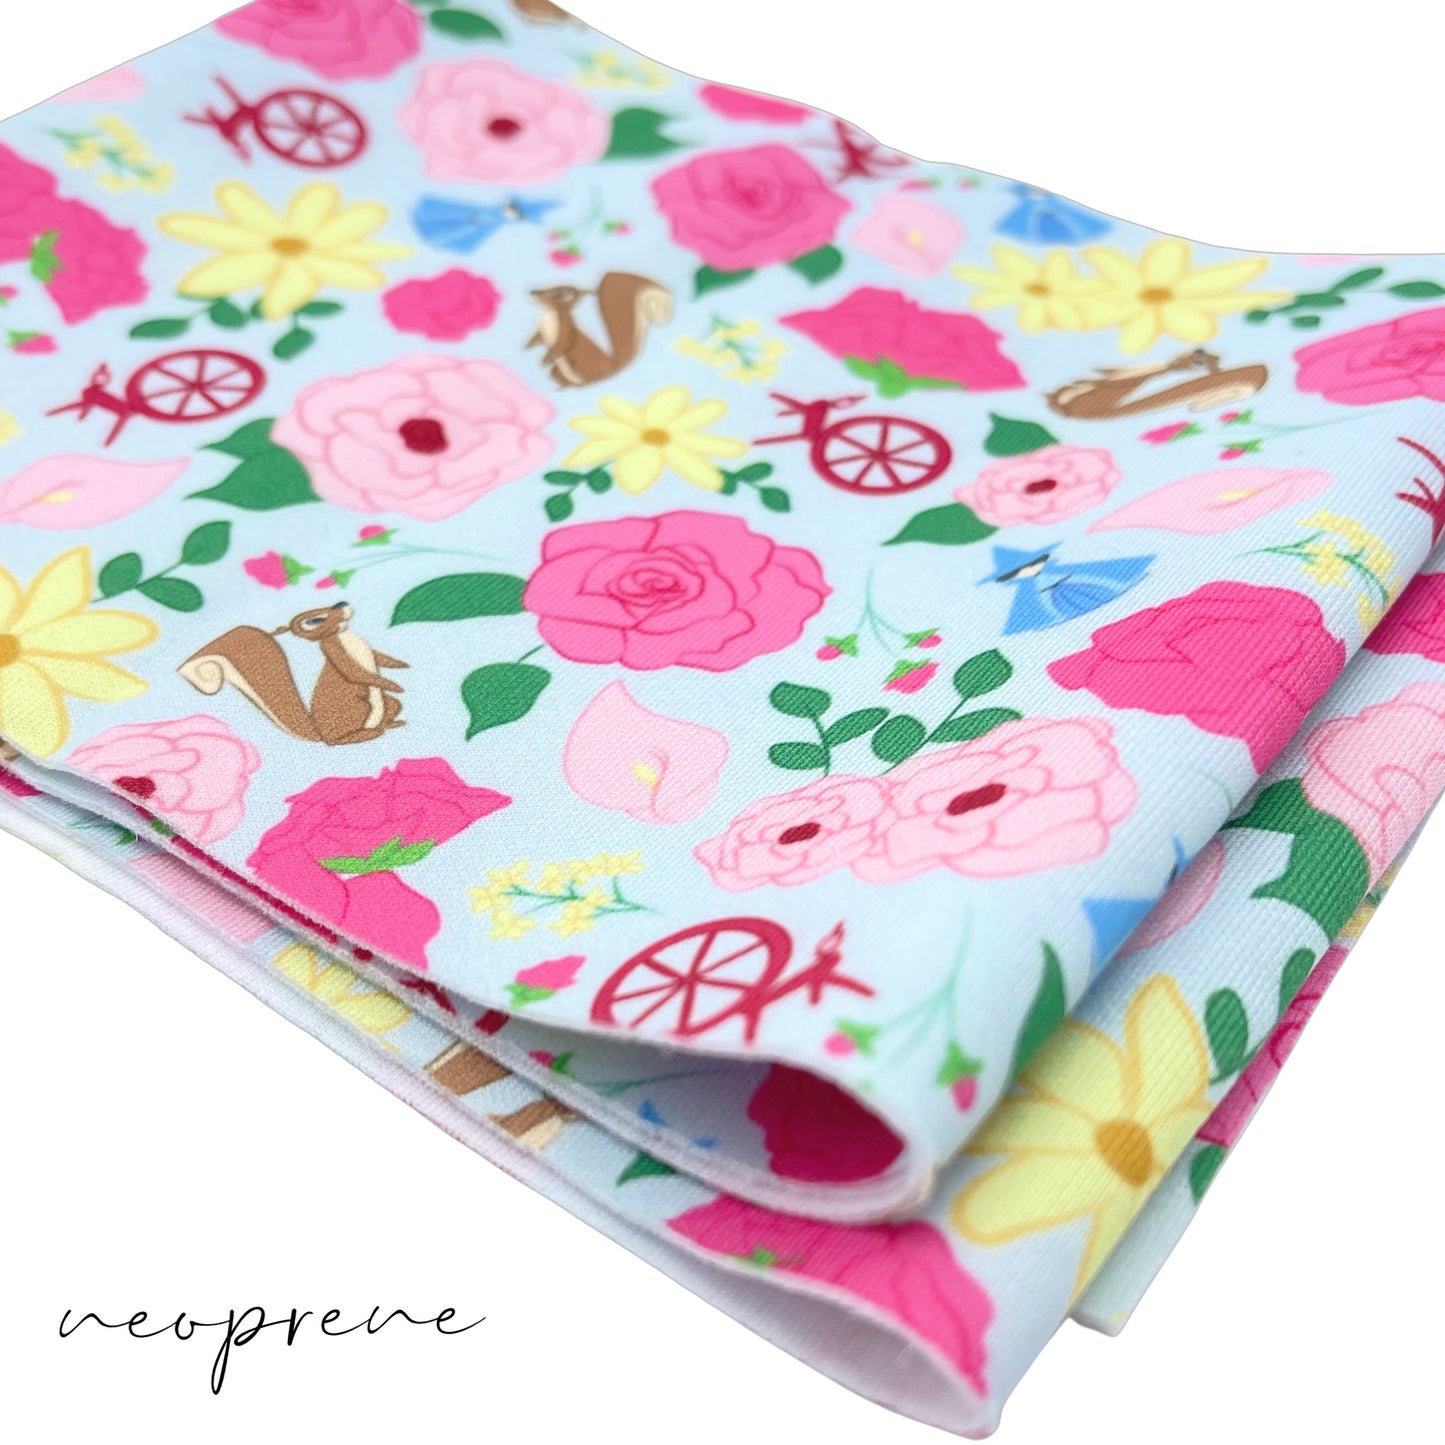 Light blue neoprene fabric with hot pink, light pink, and yellow floral princess pattern including squirrels, blue fairy, and spinning wheels.